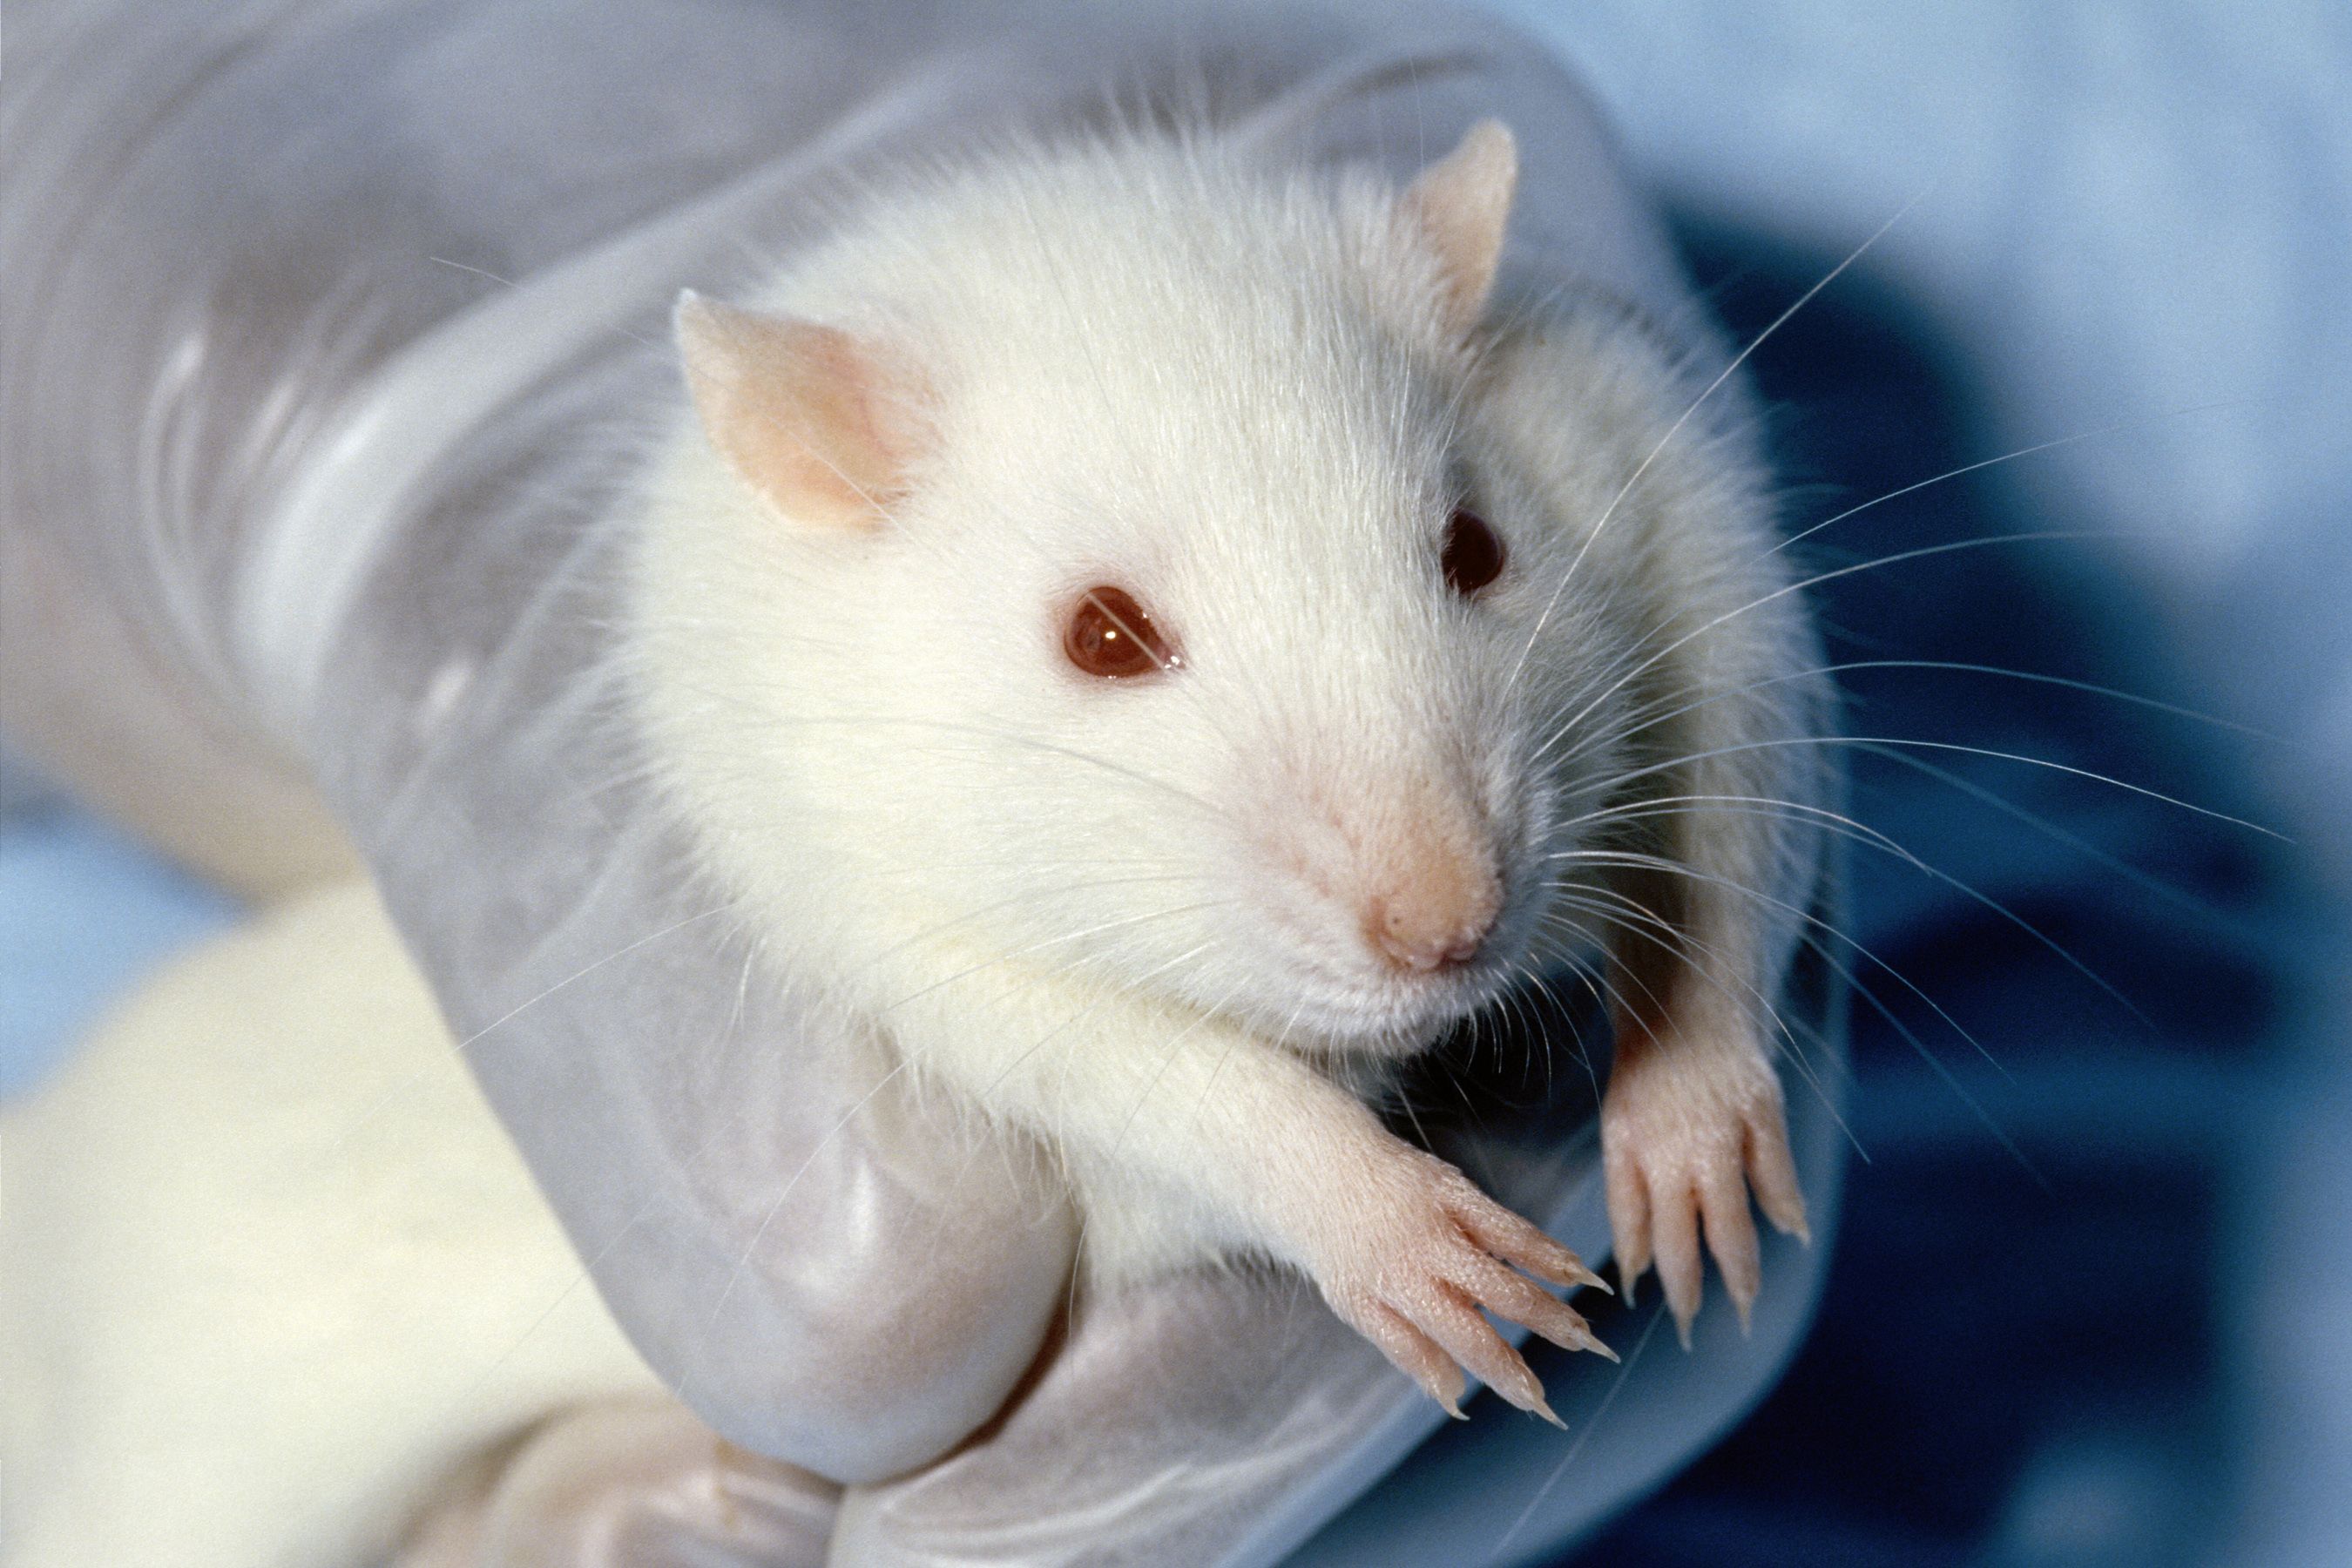 Medical Testing on Animals: A Brief History